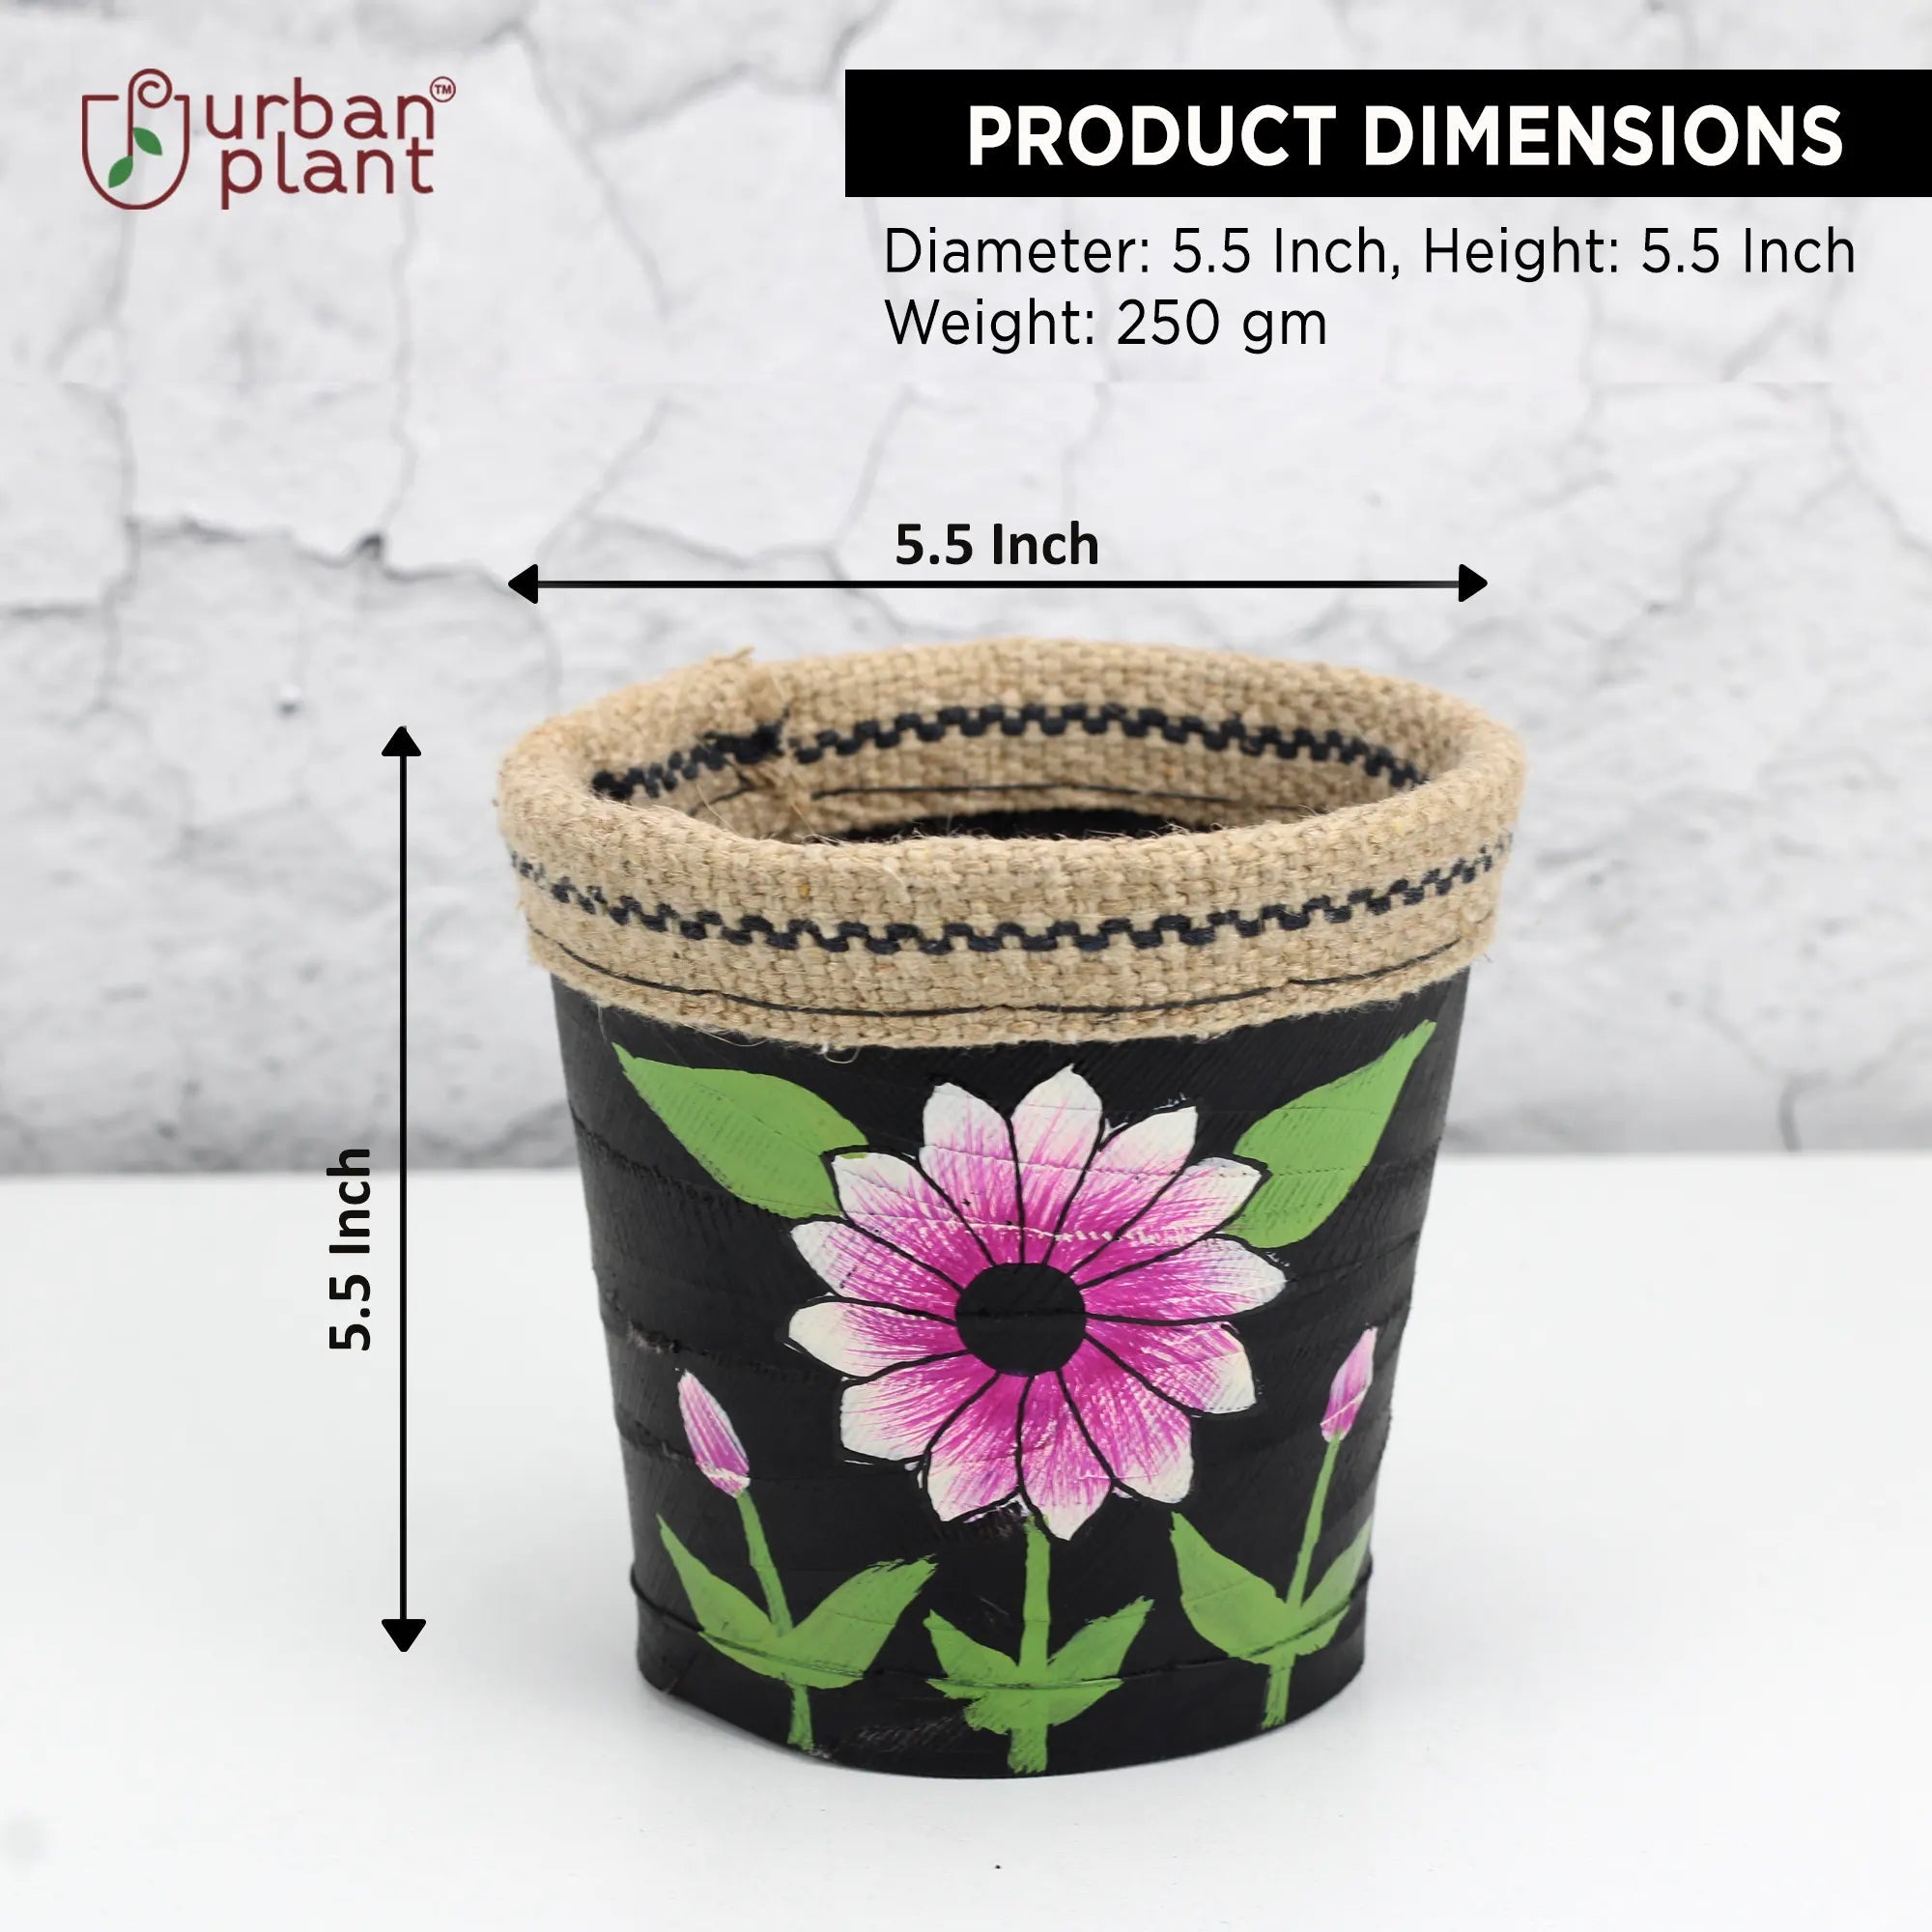 Rubber RECYCLED Hand-Painted Plant Pots (1224 C) Urban Plant 